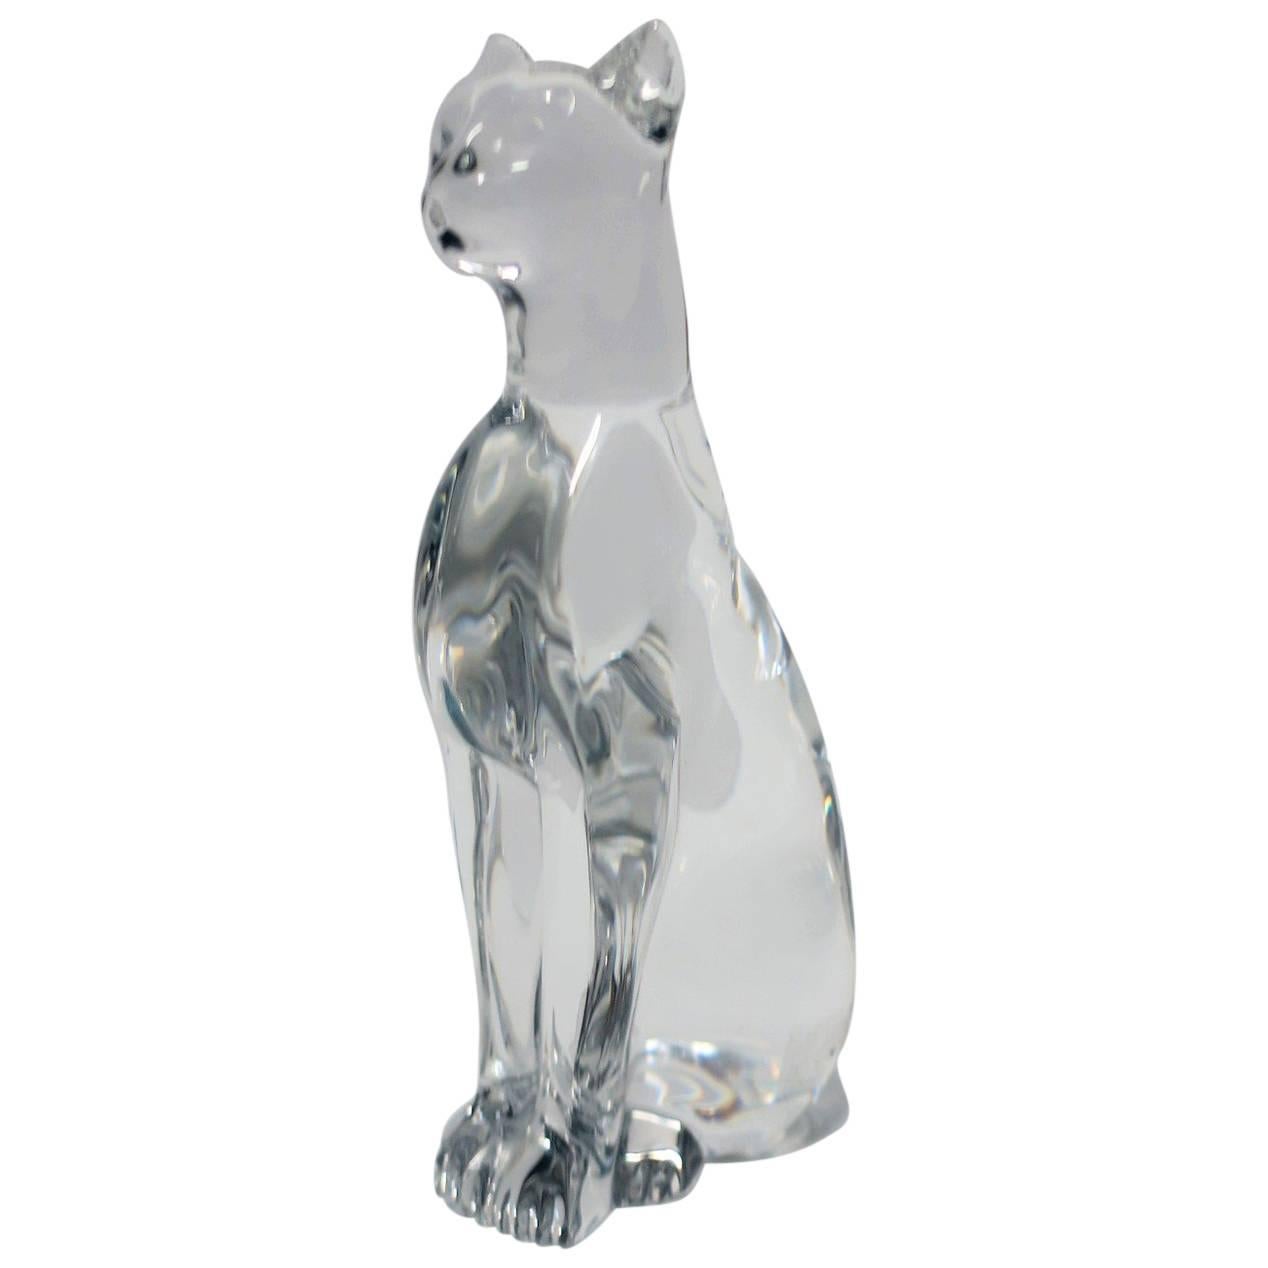 Art Deco French Baccarat Crystal Cheetah or Panther Cat Sculpture